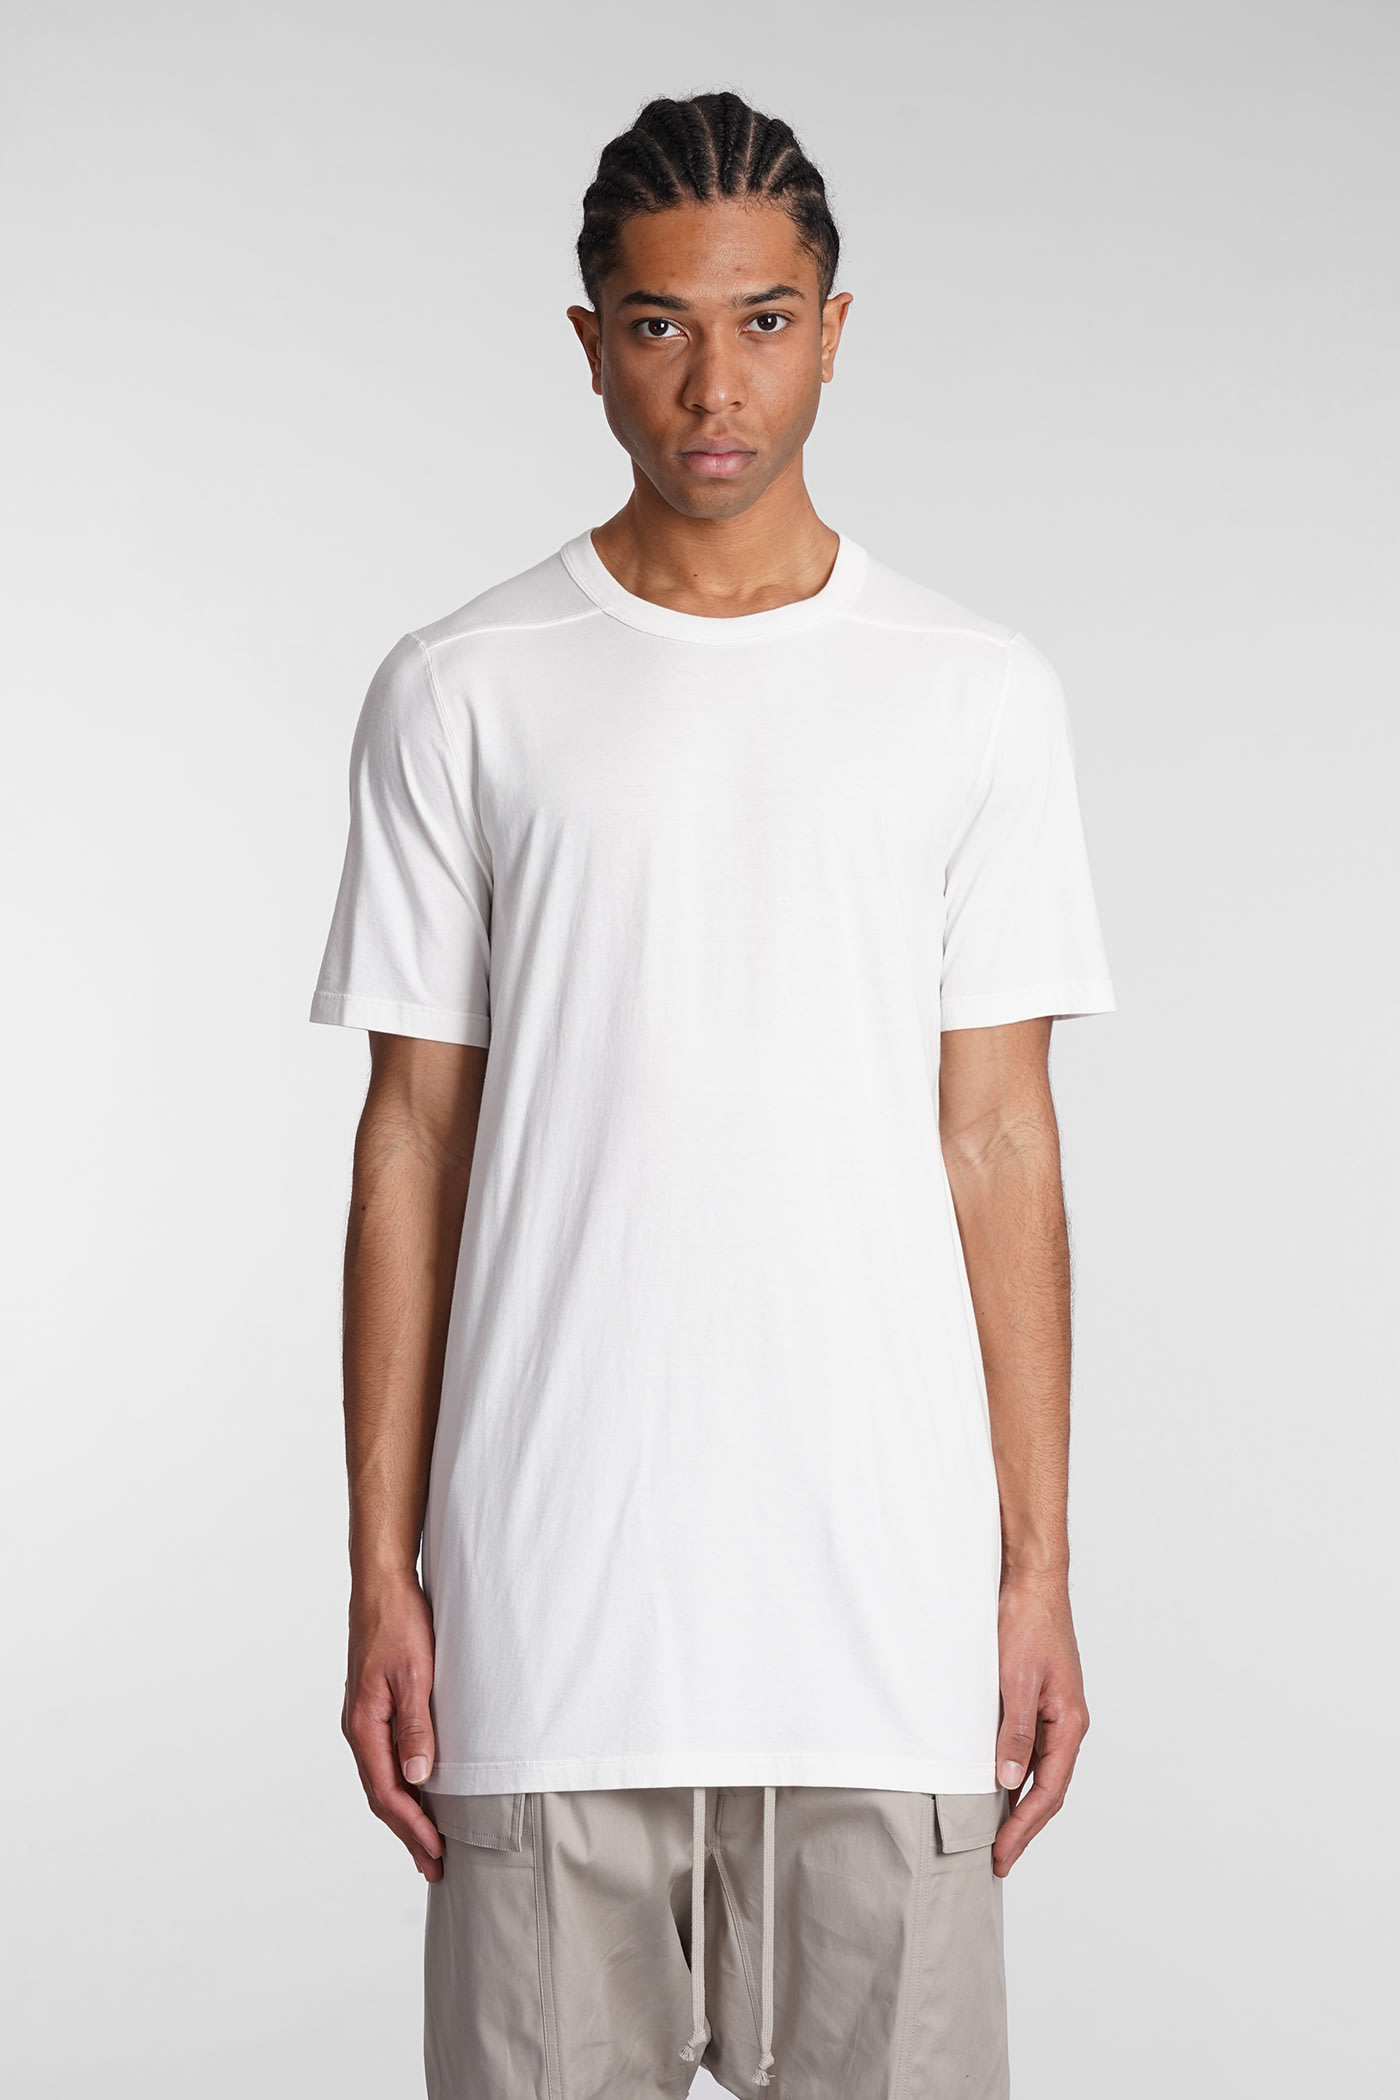 RICK OWENS LEVEL T T-SHIRT IN WHITE COTTON